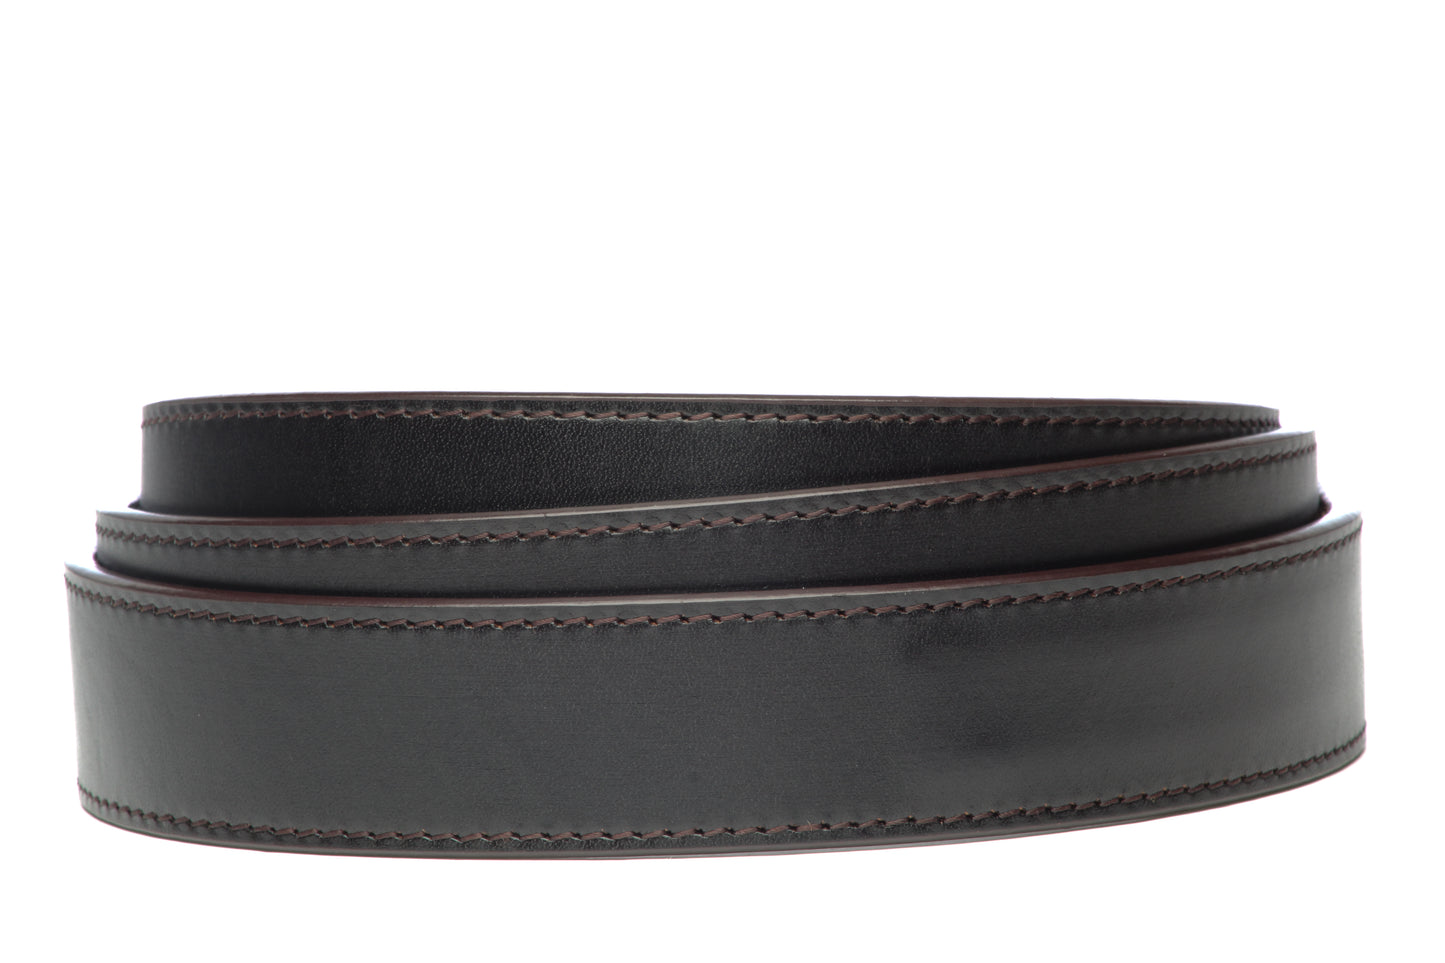 1.25" Espresso Vegetable Tanned Leather Strap - Anson Belt & Buckle